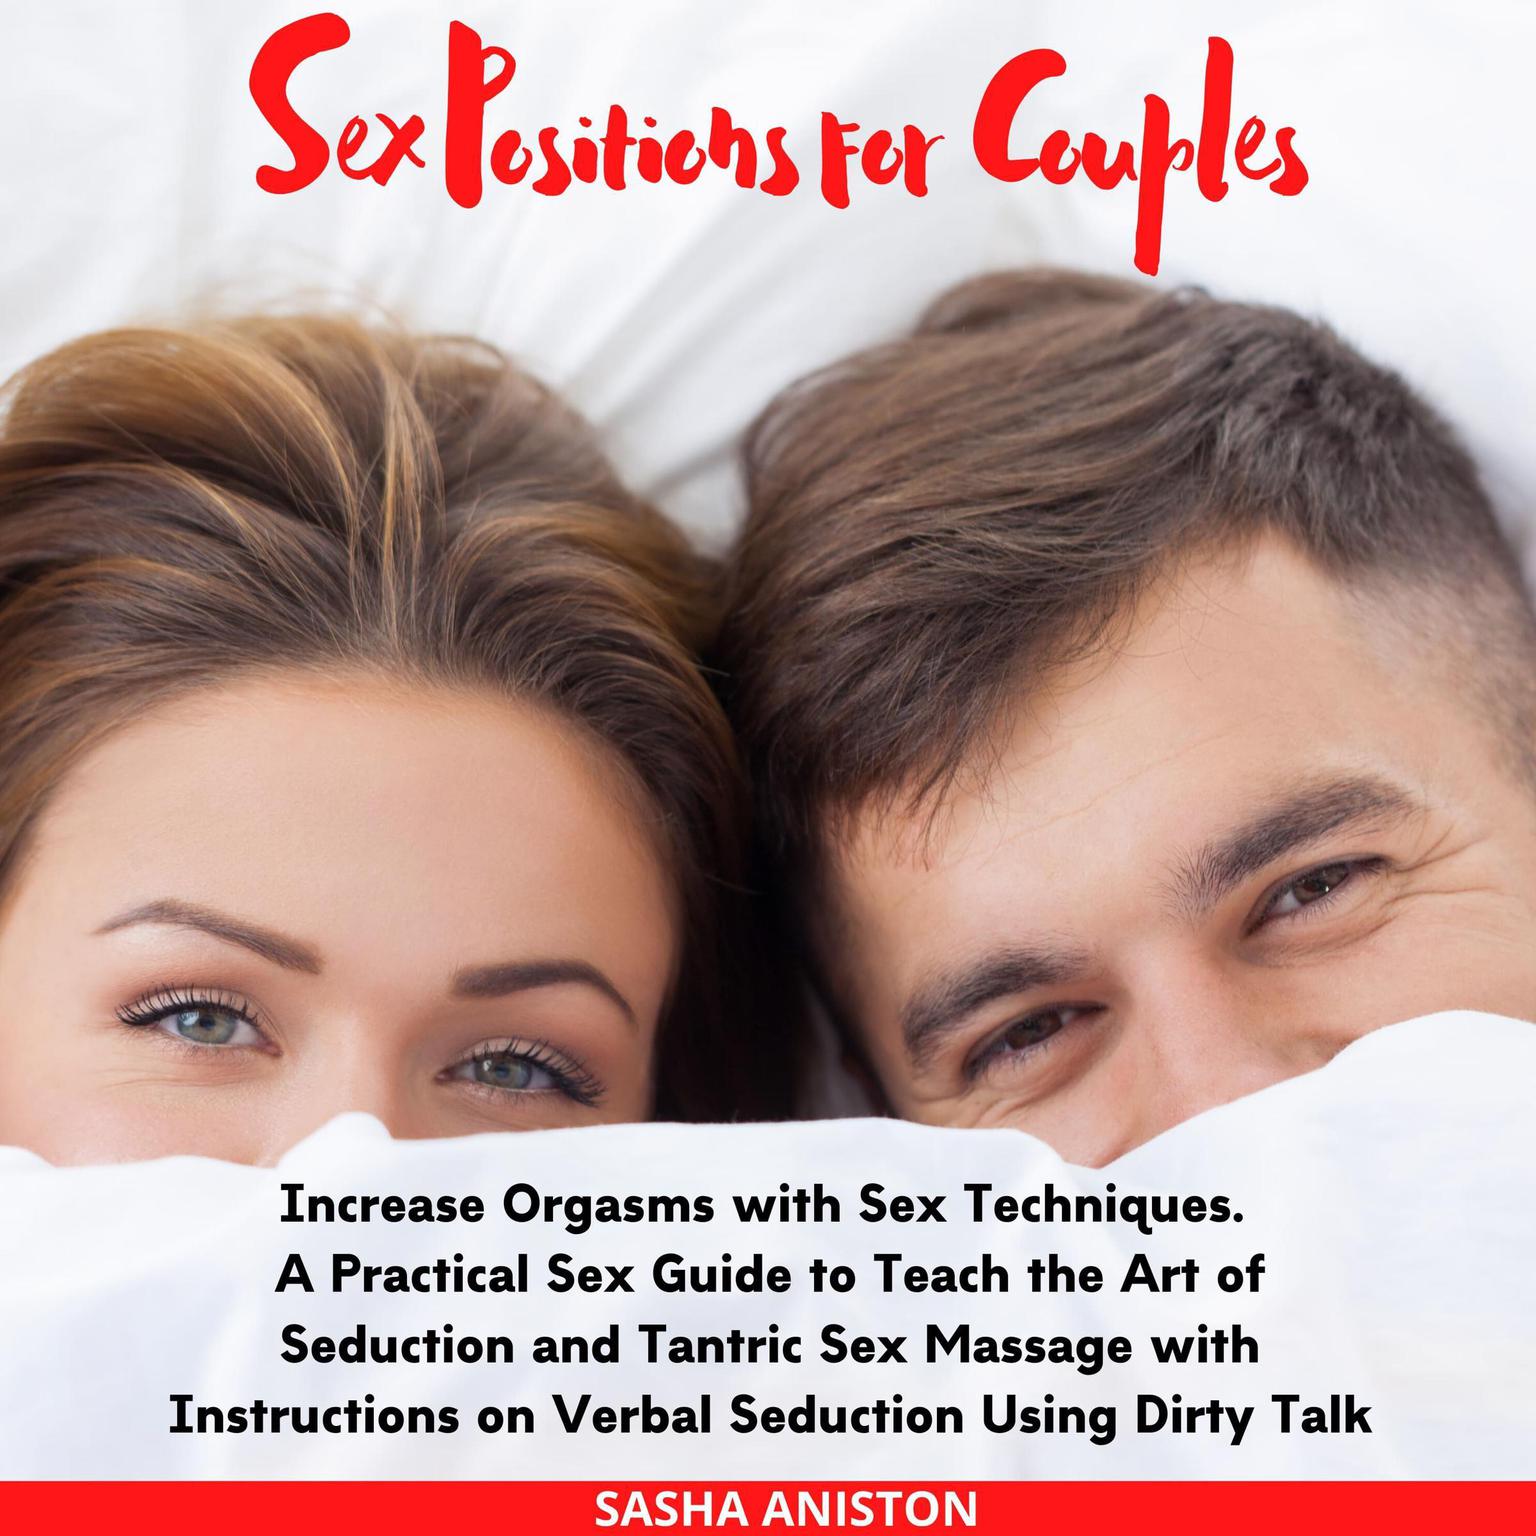 Sex Positions for Couples: Increase Orgasms with Sex Techniques. A Practical Sex Guide to Teach the Art of Seduction and Tantric Sex Massage with Instructions on Verbal Seduction Using Dirty Talk Audiobook, by Sasha Aniston